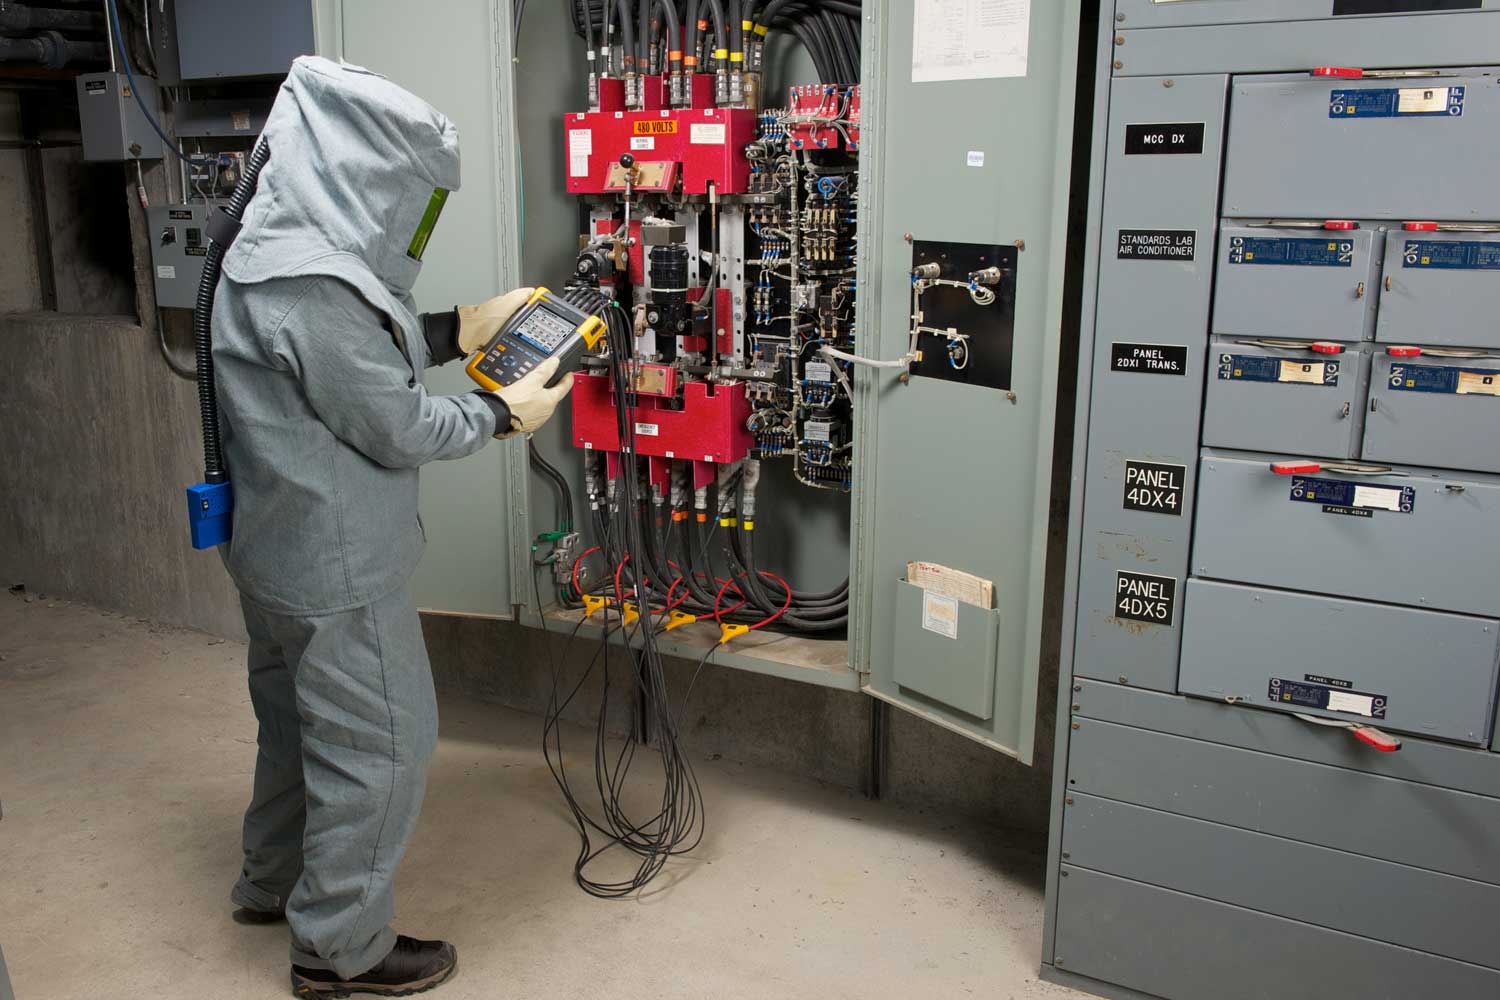 Using the Fluke 435-II Power Quality Analyzer at the service panel to diagnose power quality issues